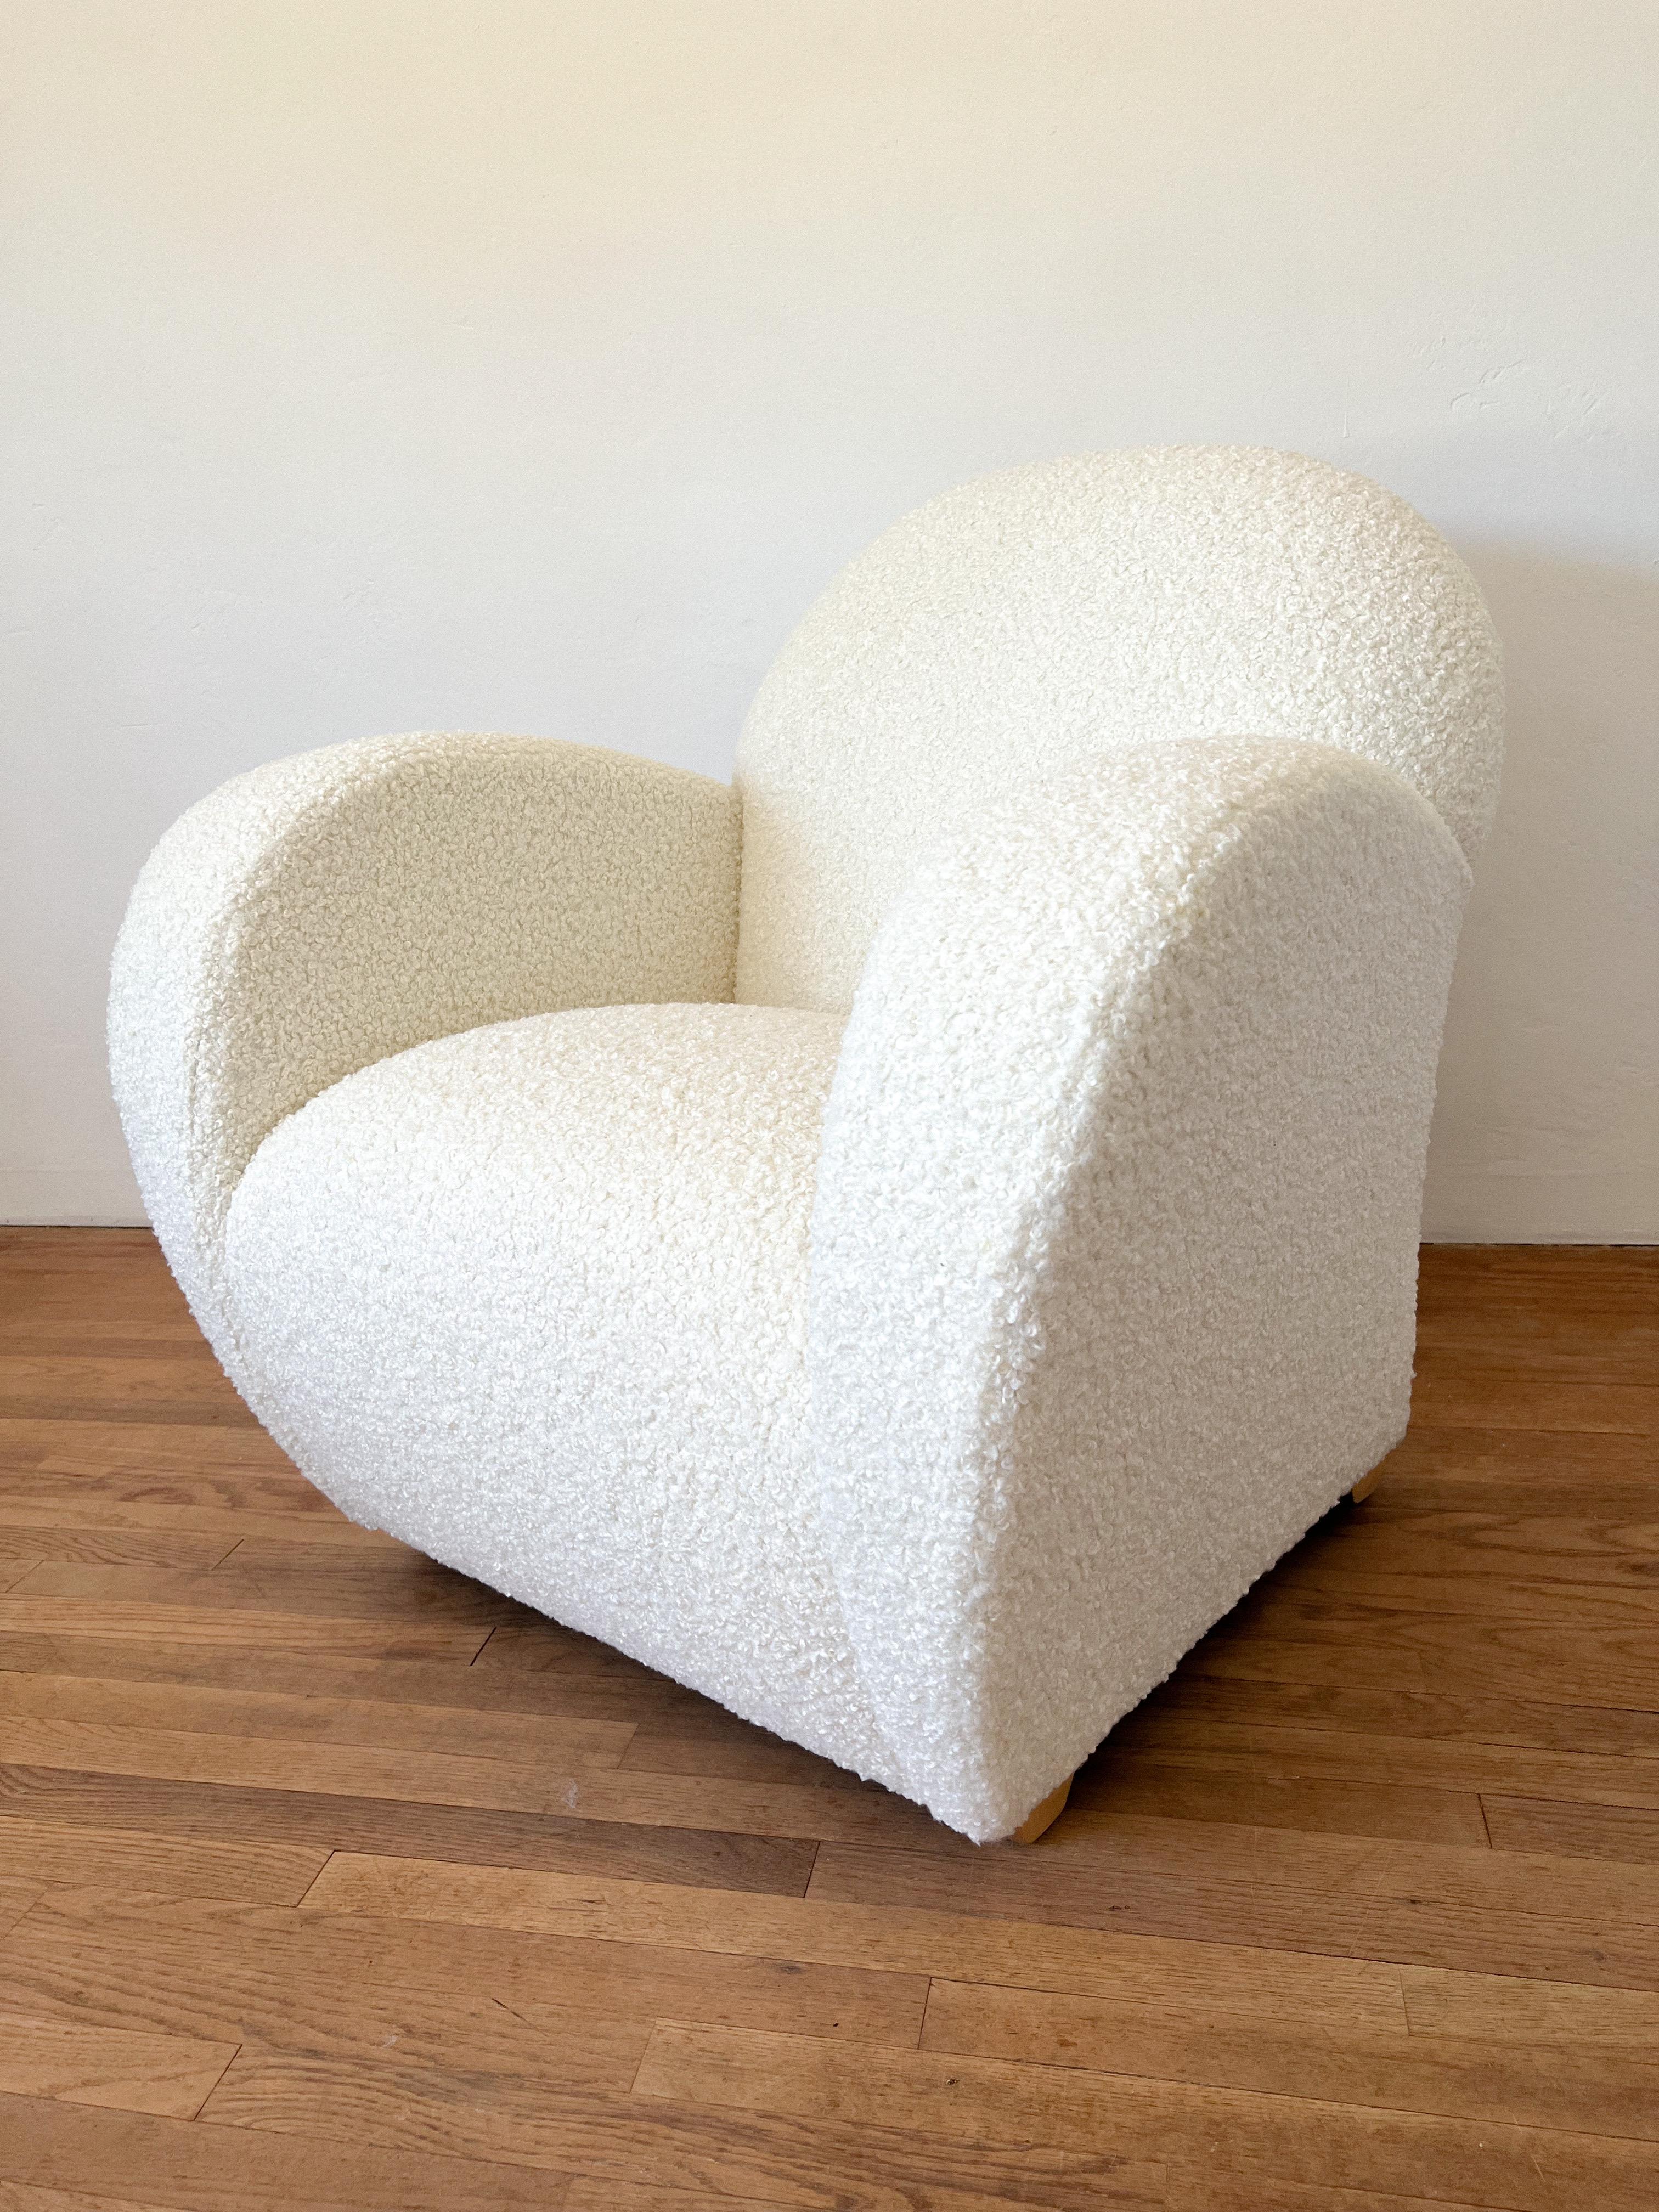 Postmodern Lounge Chair by Loewenstein fully reupholstered in imported cream Italian Sherpa fabric.